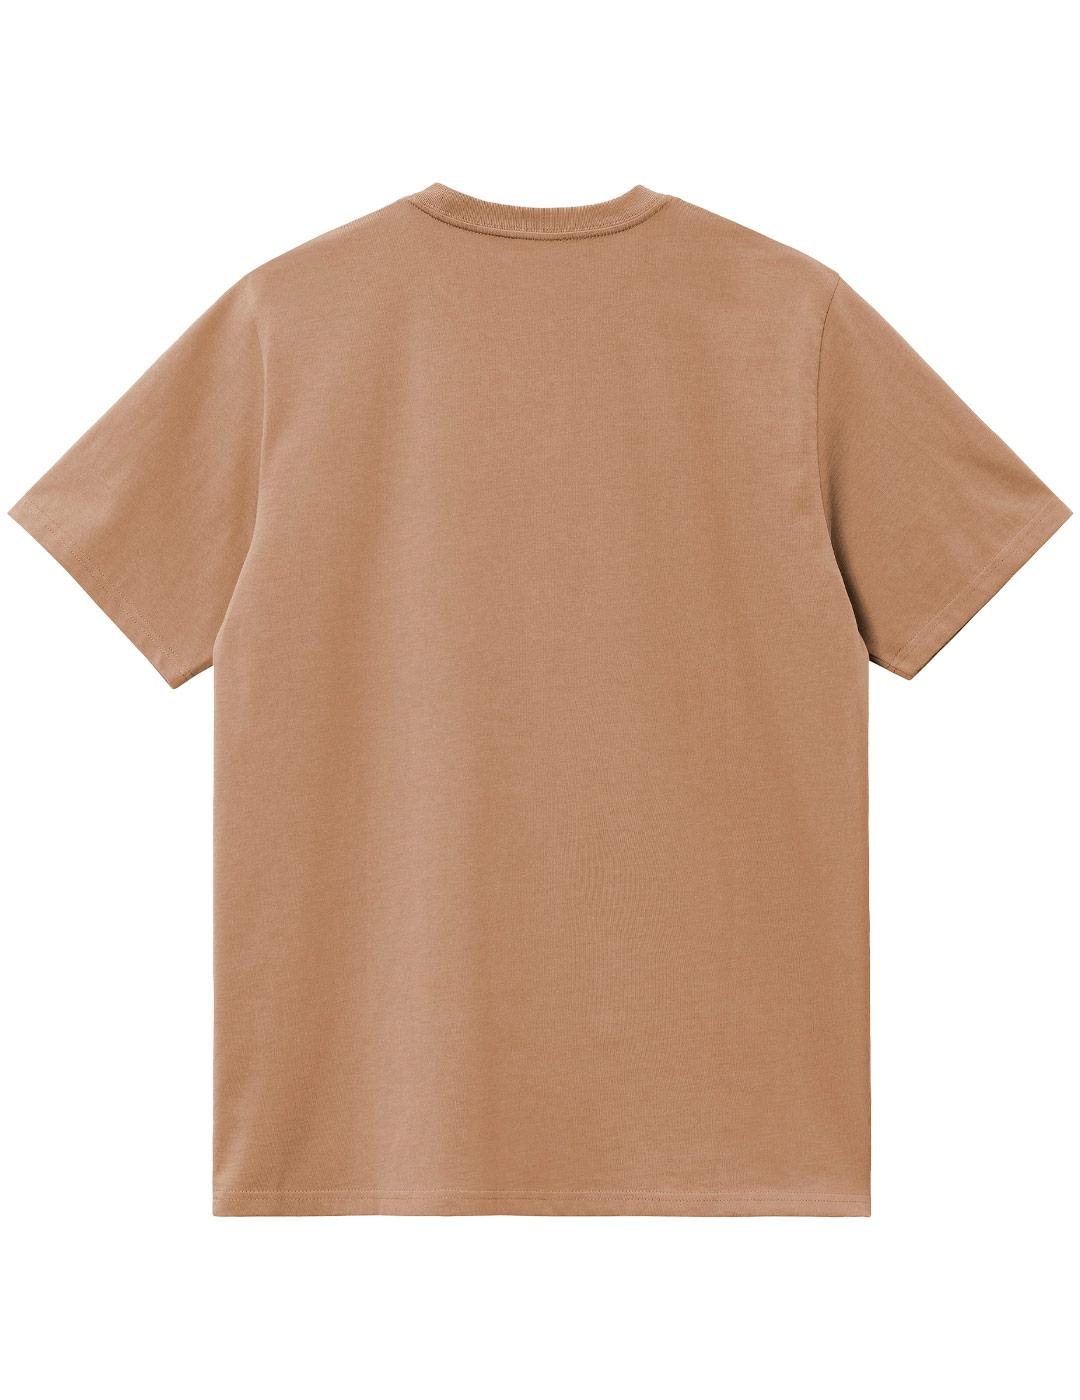 T-shirt Carhartt Wip Chase Brown